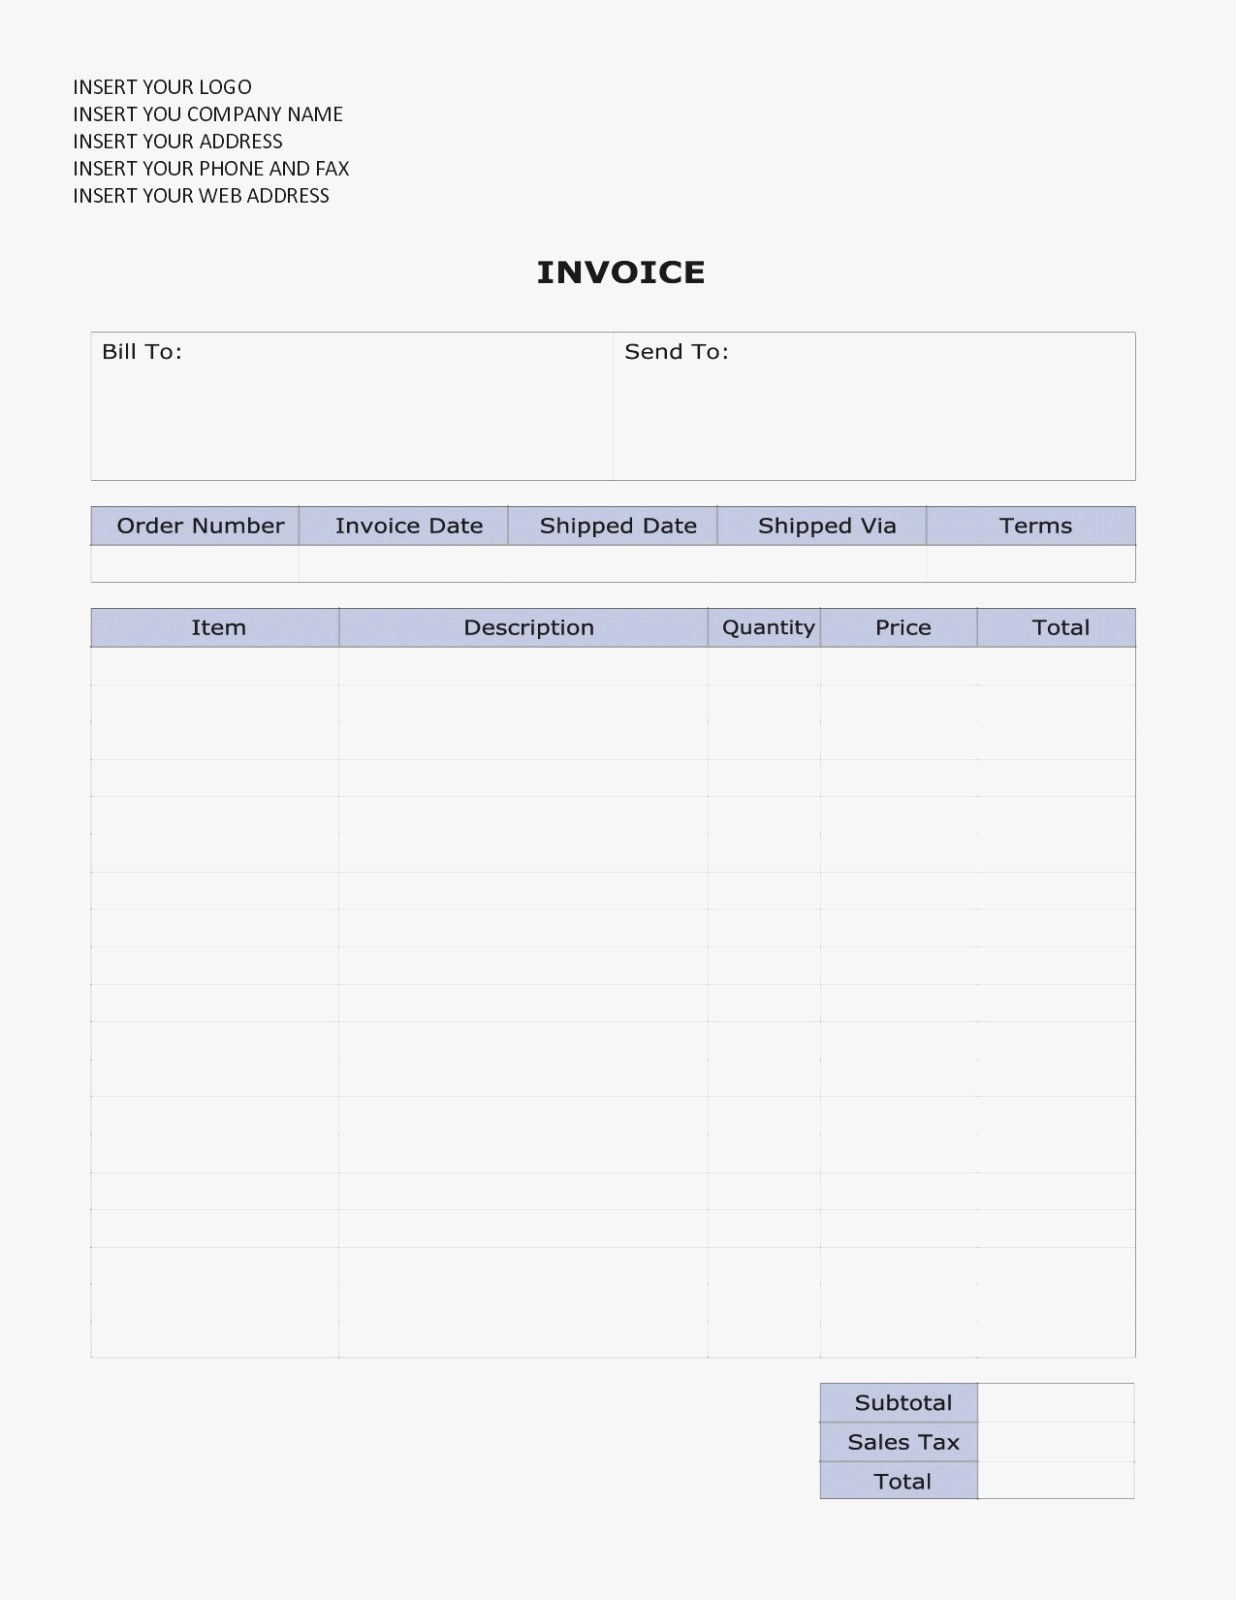 Download Invoice Template for Mac Lovely Invoice Template Mac Free Download Filename Port by